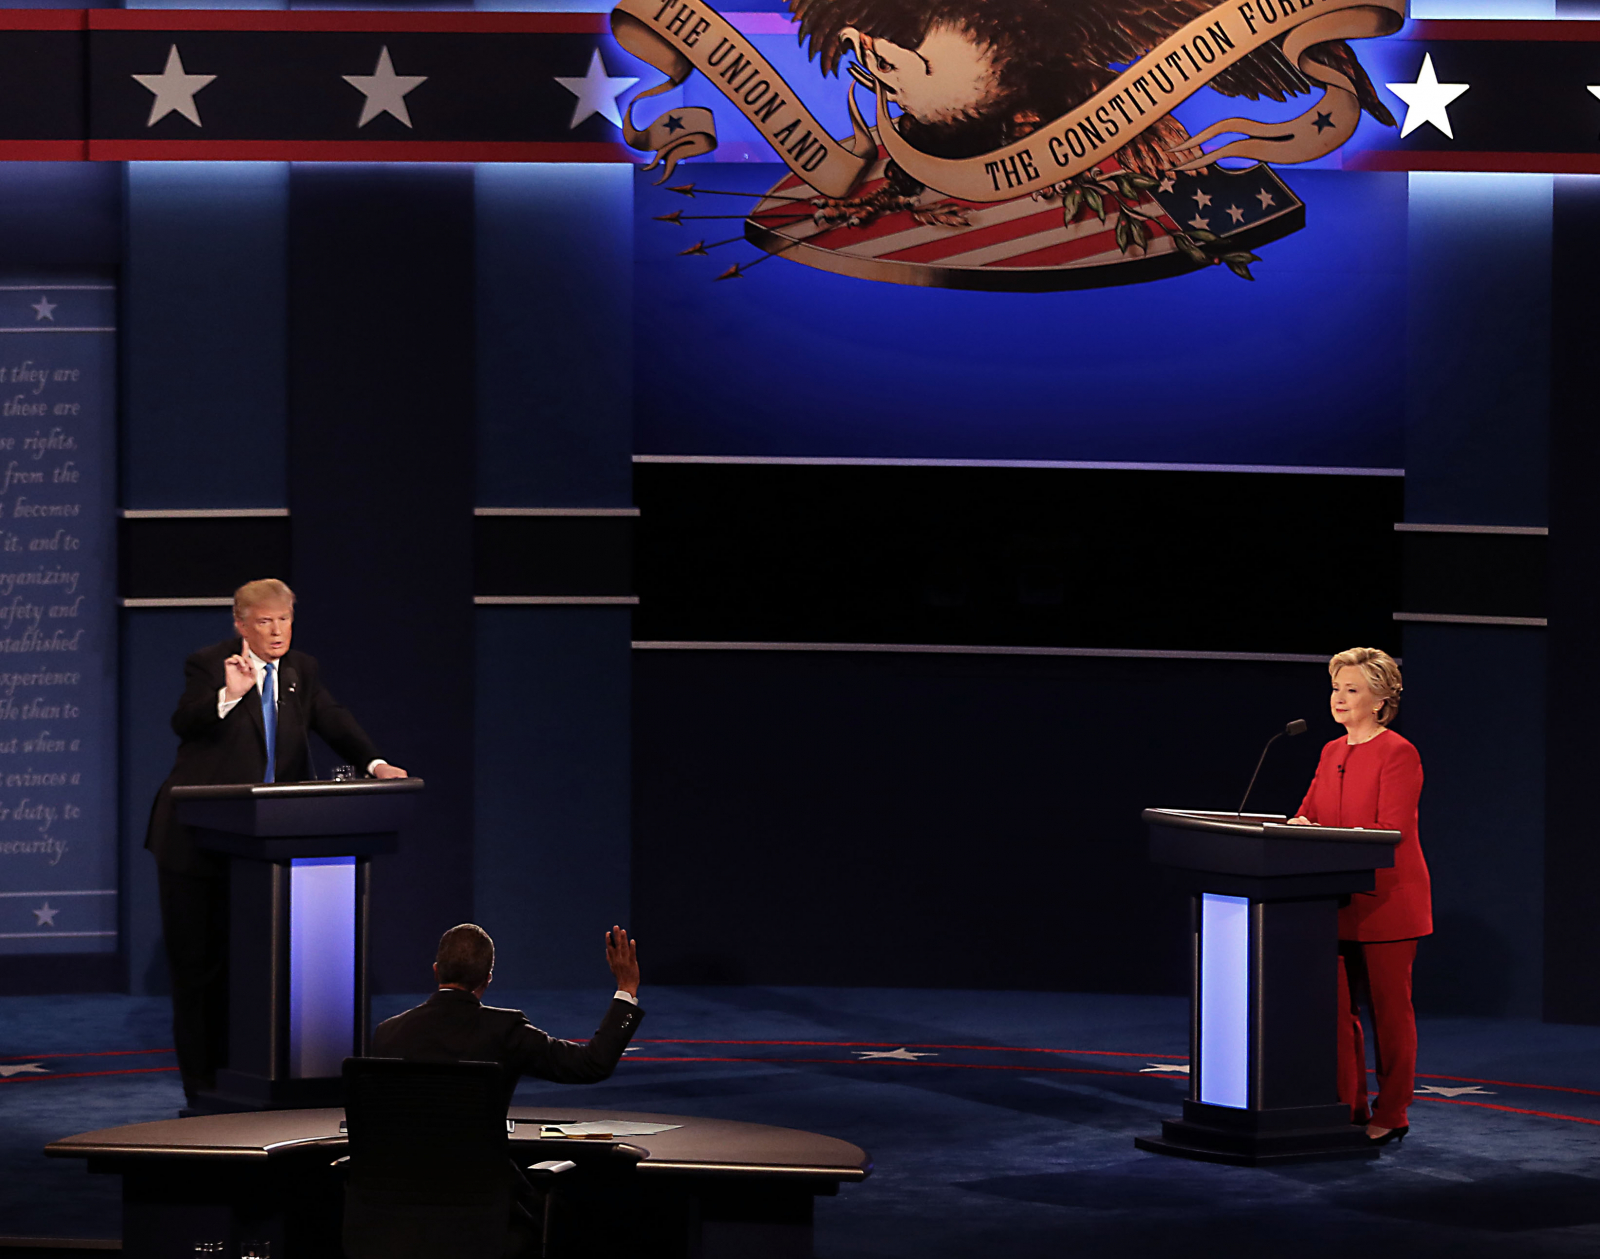 U.S. Presidential Debates Are Part of A Global Movement